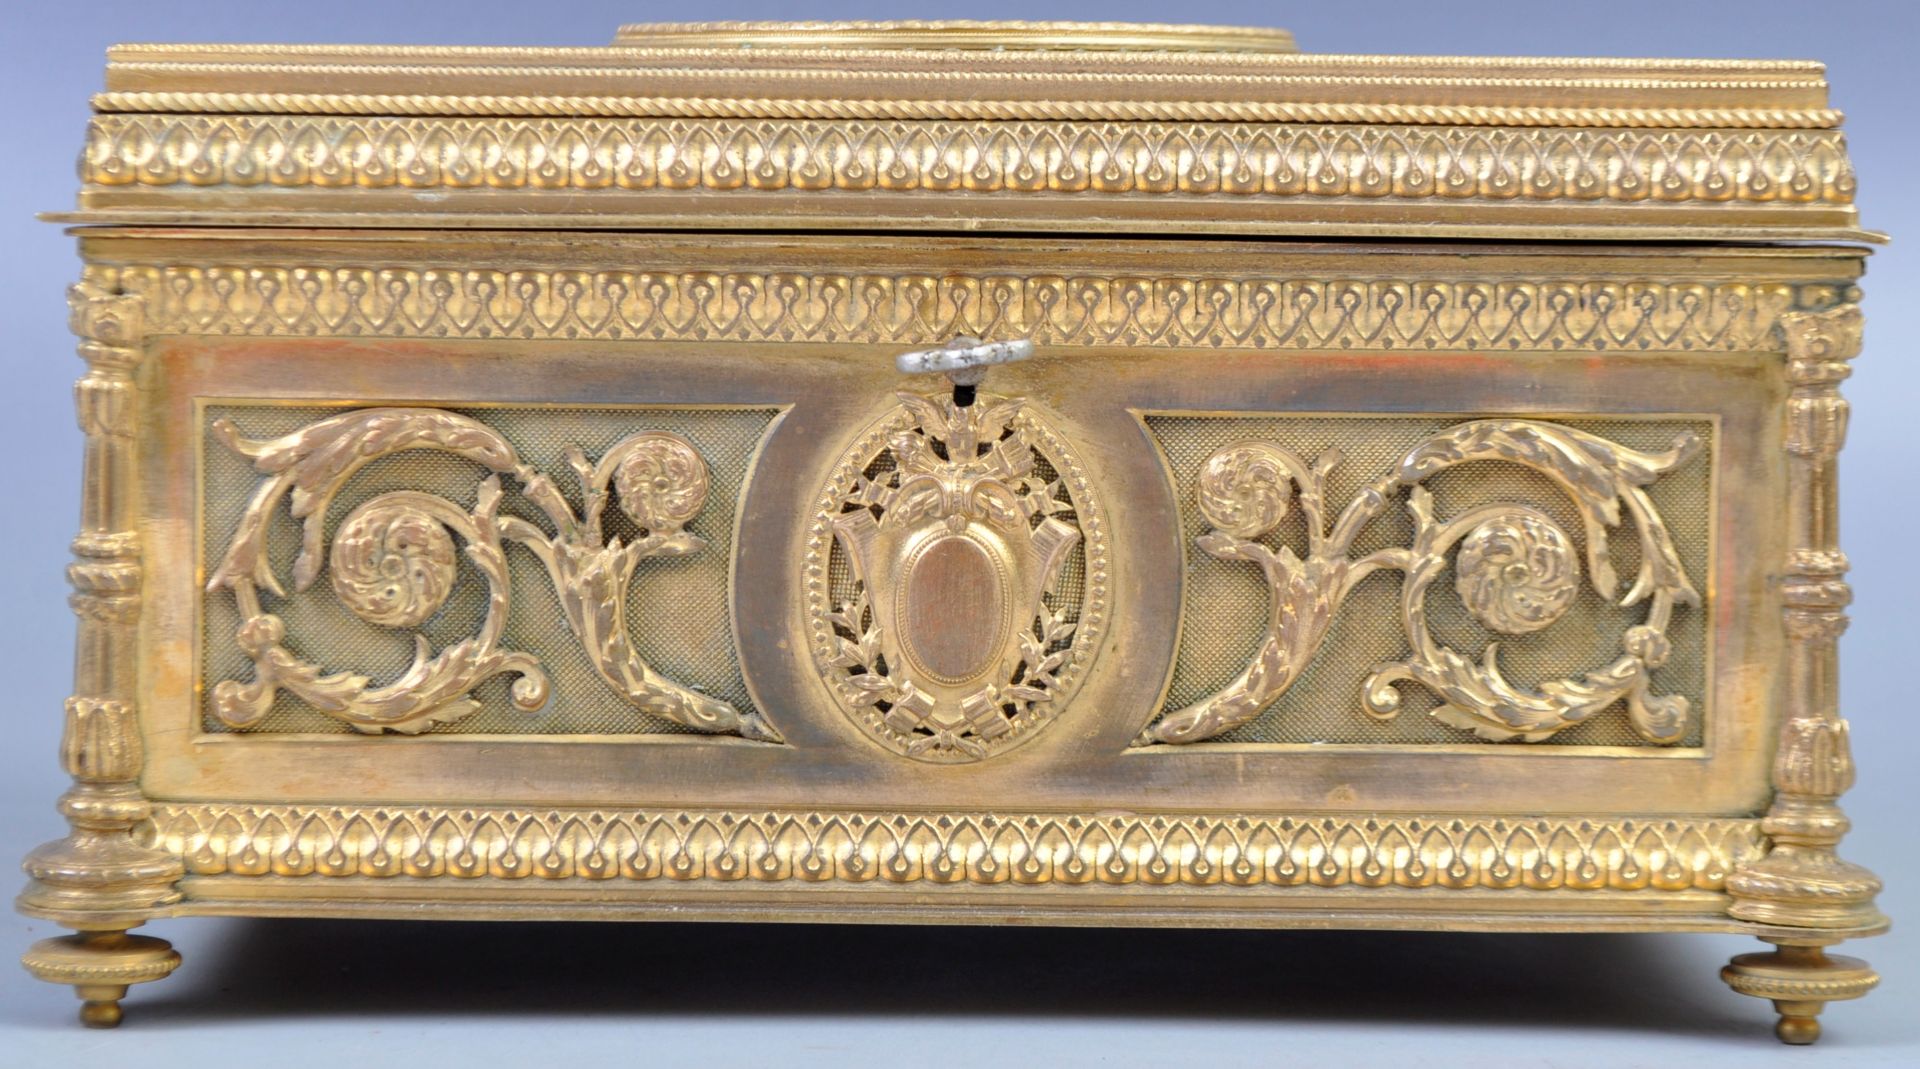 19TH CENTURY FRENCH PALAIS ROYALE GILDED ORMOLU CASKET - Image 4 of 6